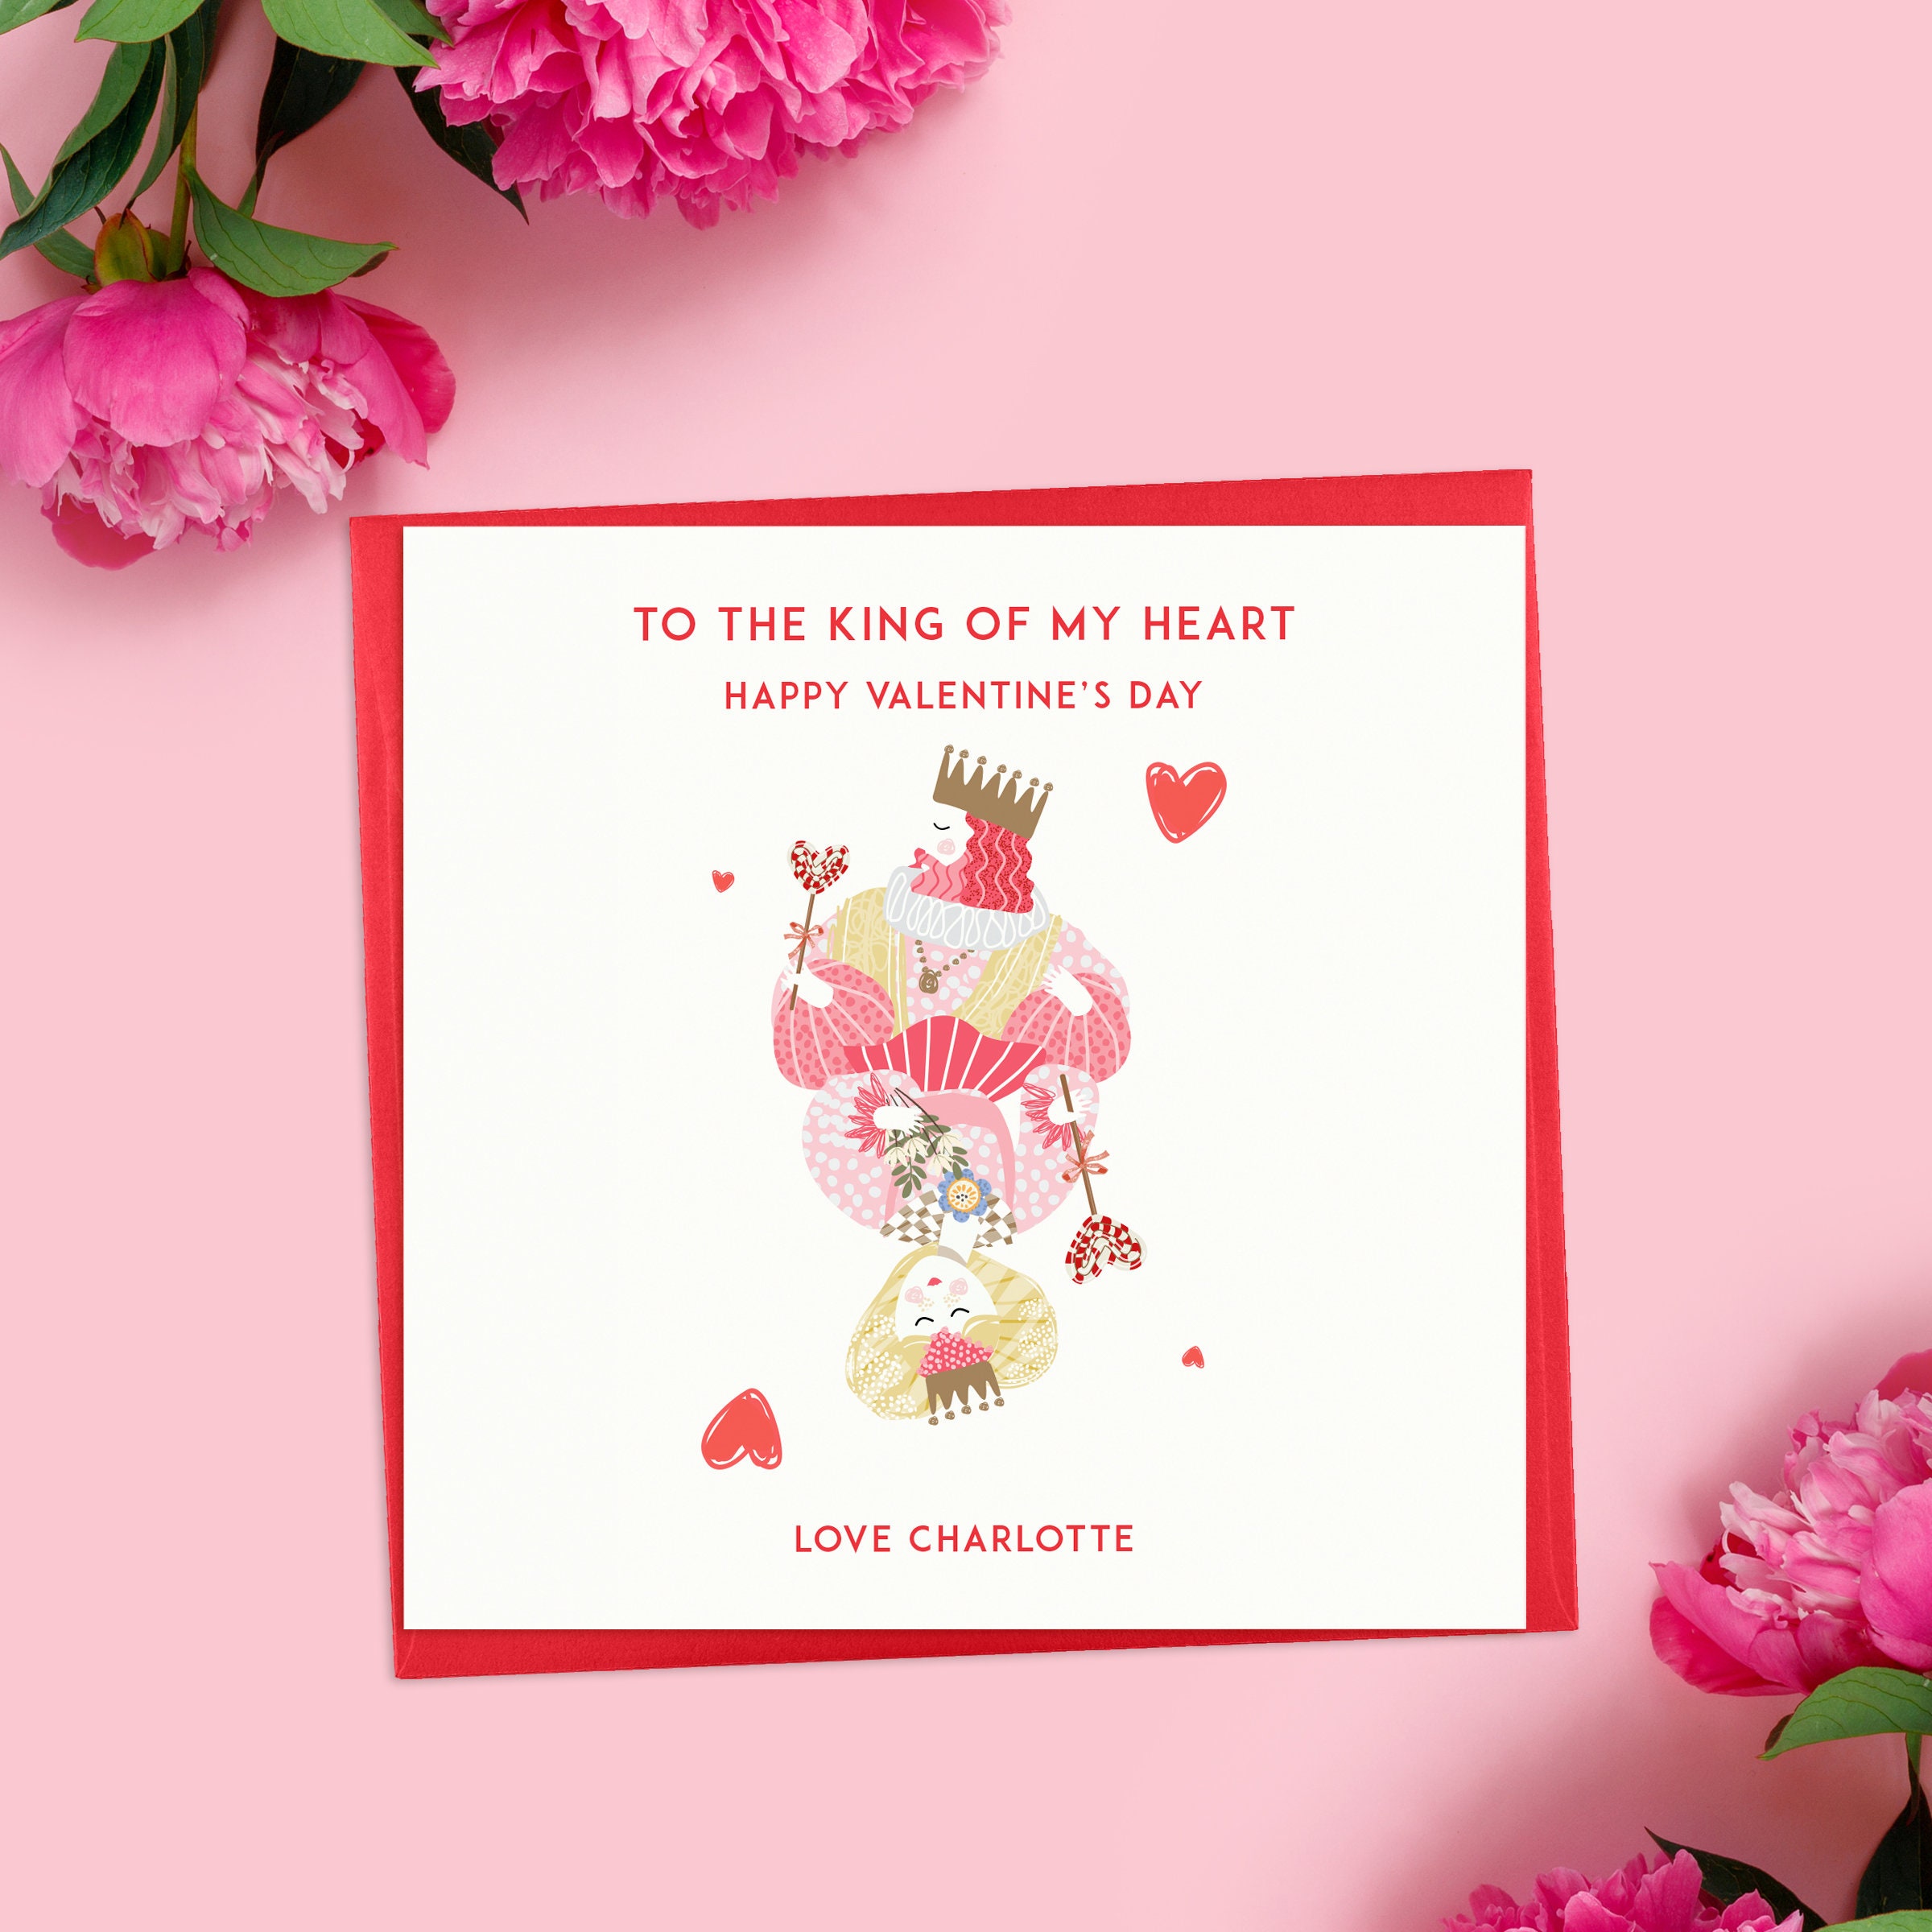  King of My Heart Personalized Valentine Card for Him